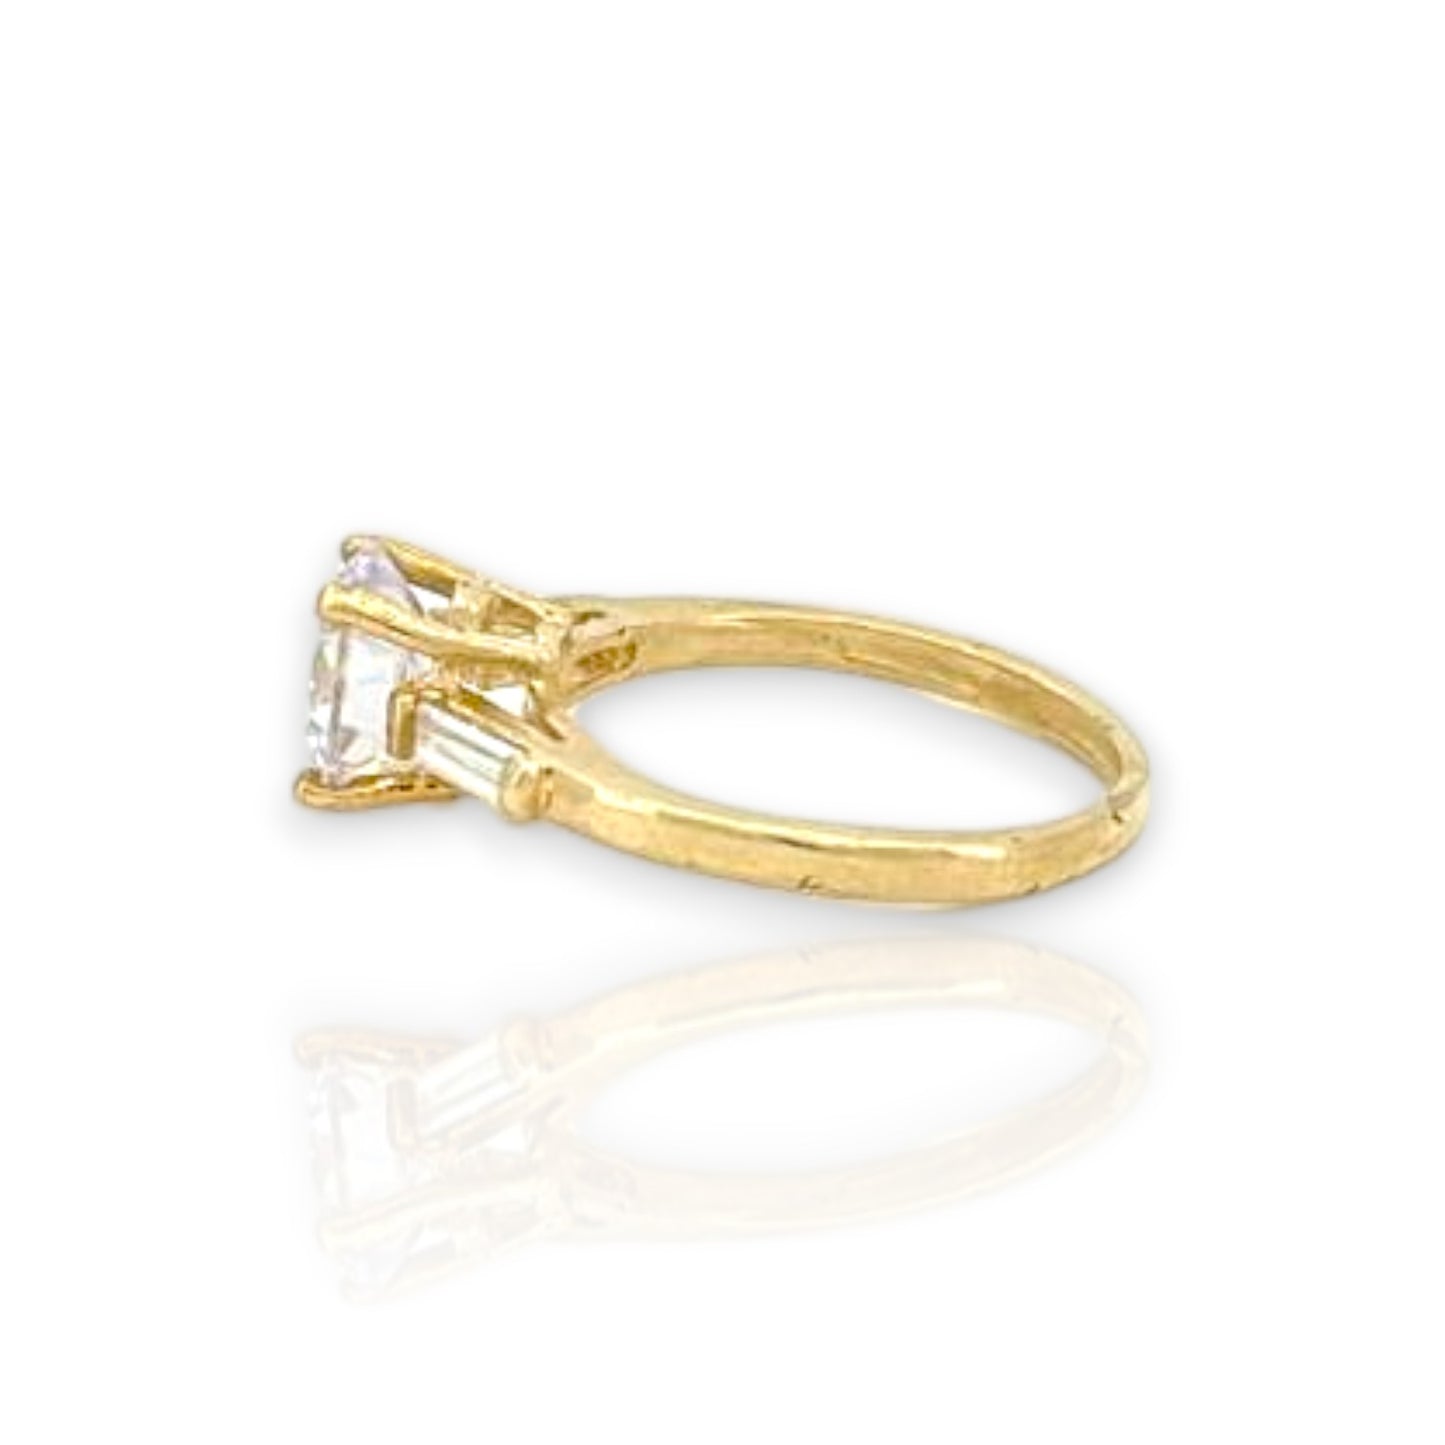 Round Cut Center Stone With Baguette Side Stones Engagement Ring - 10k Yellow Gold